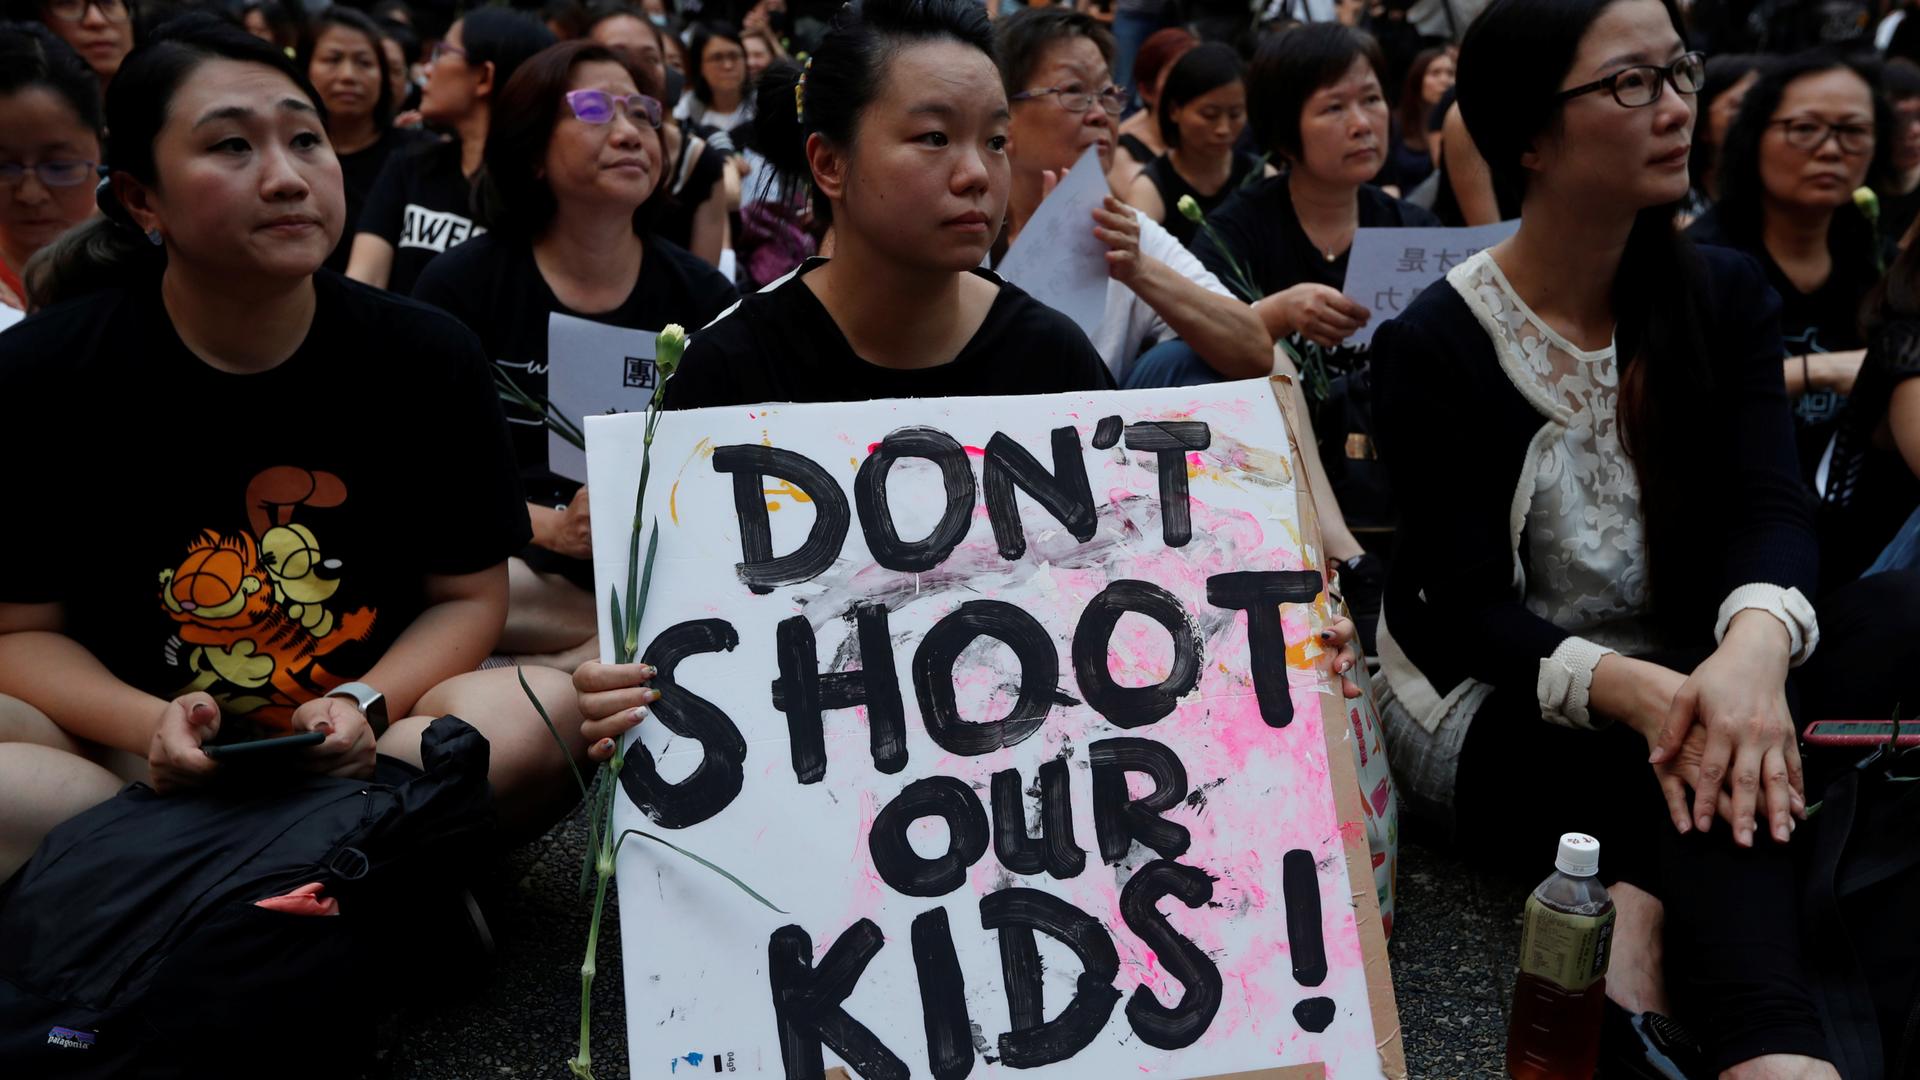 People attend a rally in support of demonstrators protesting against proposed extradition bill with China, in Hong Kong, China, June 14, 2019.